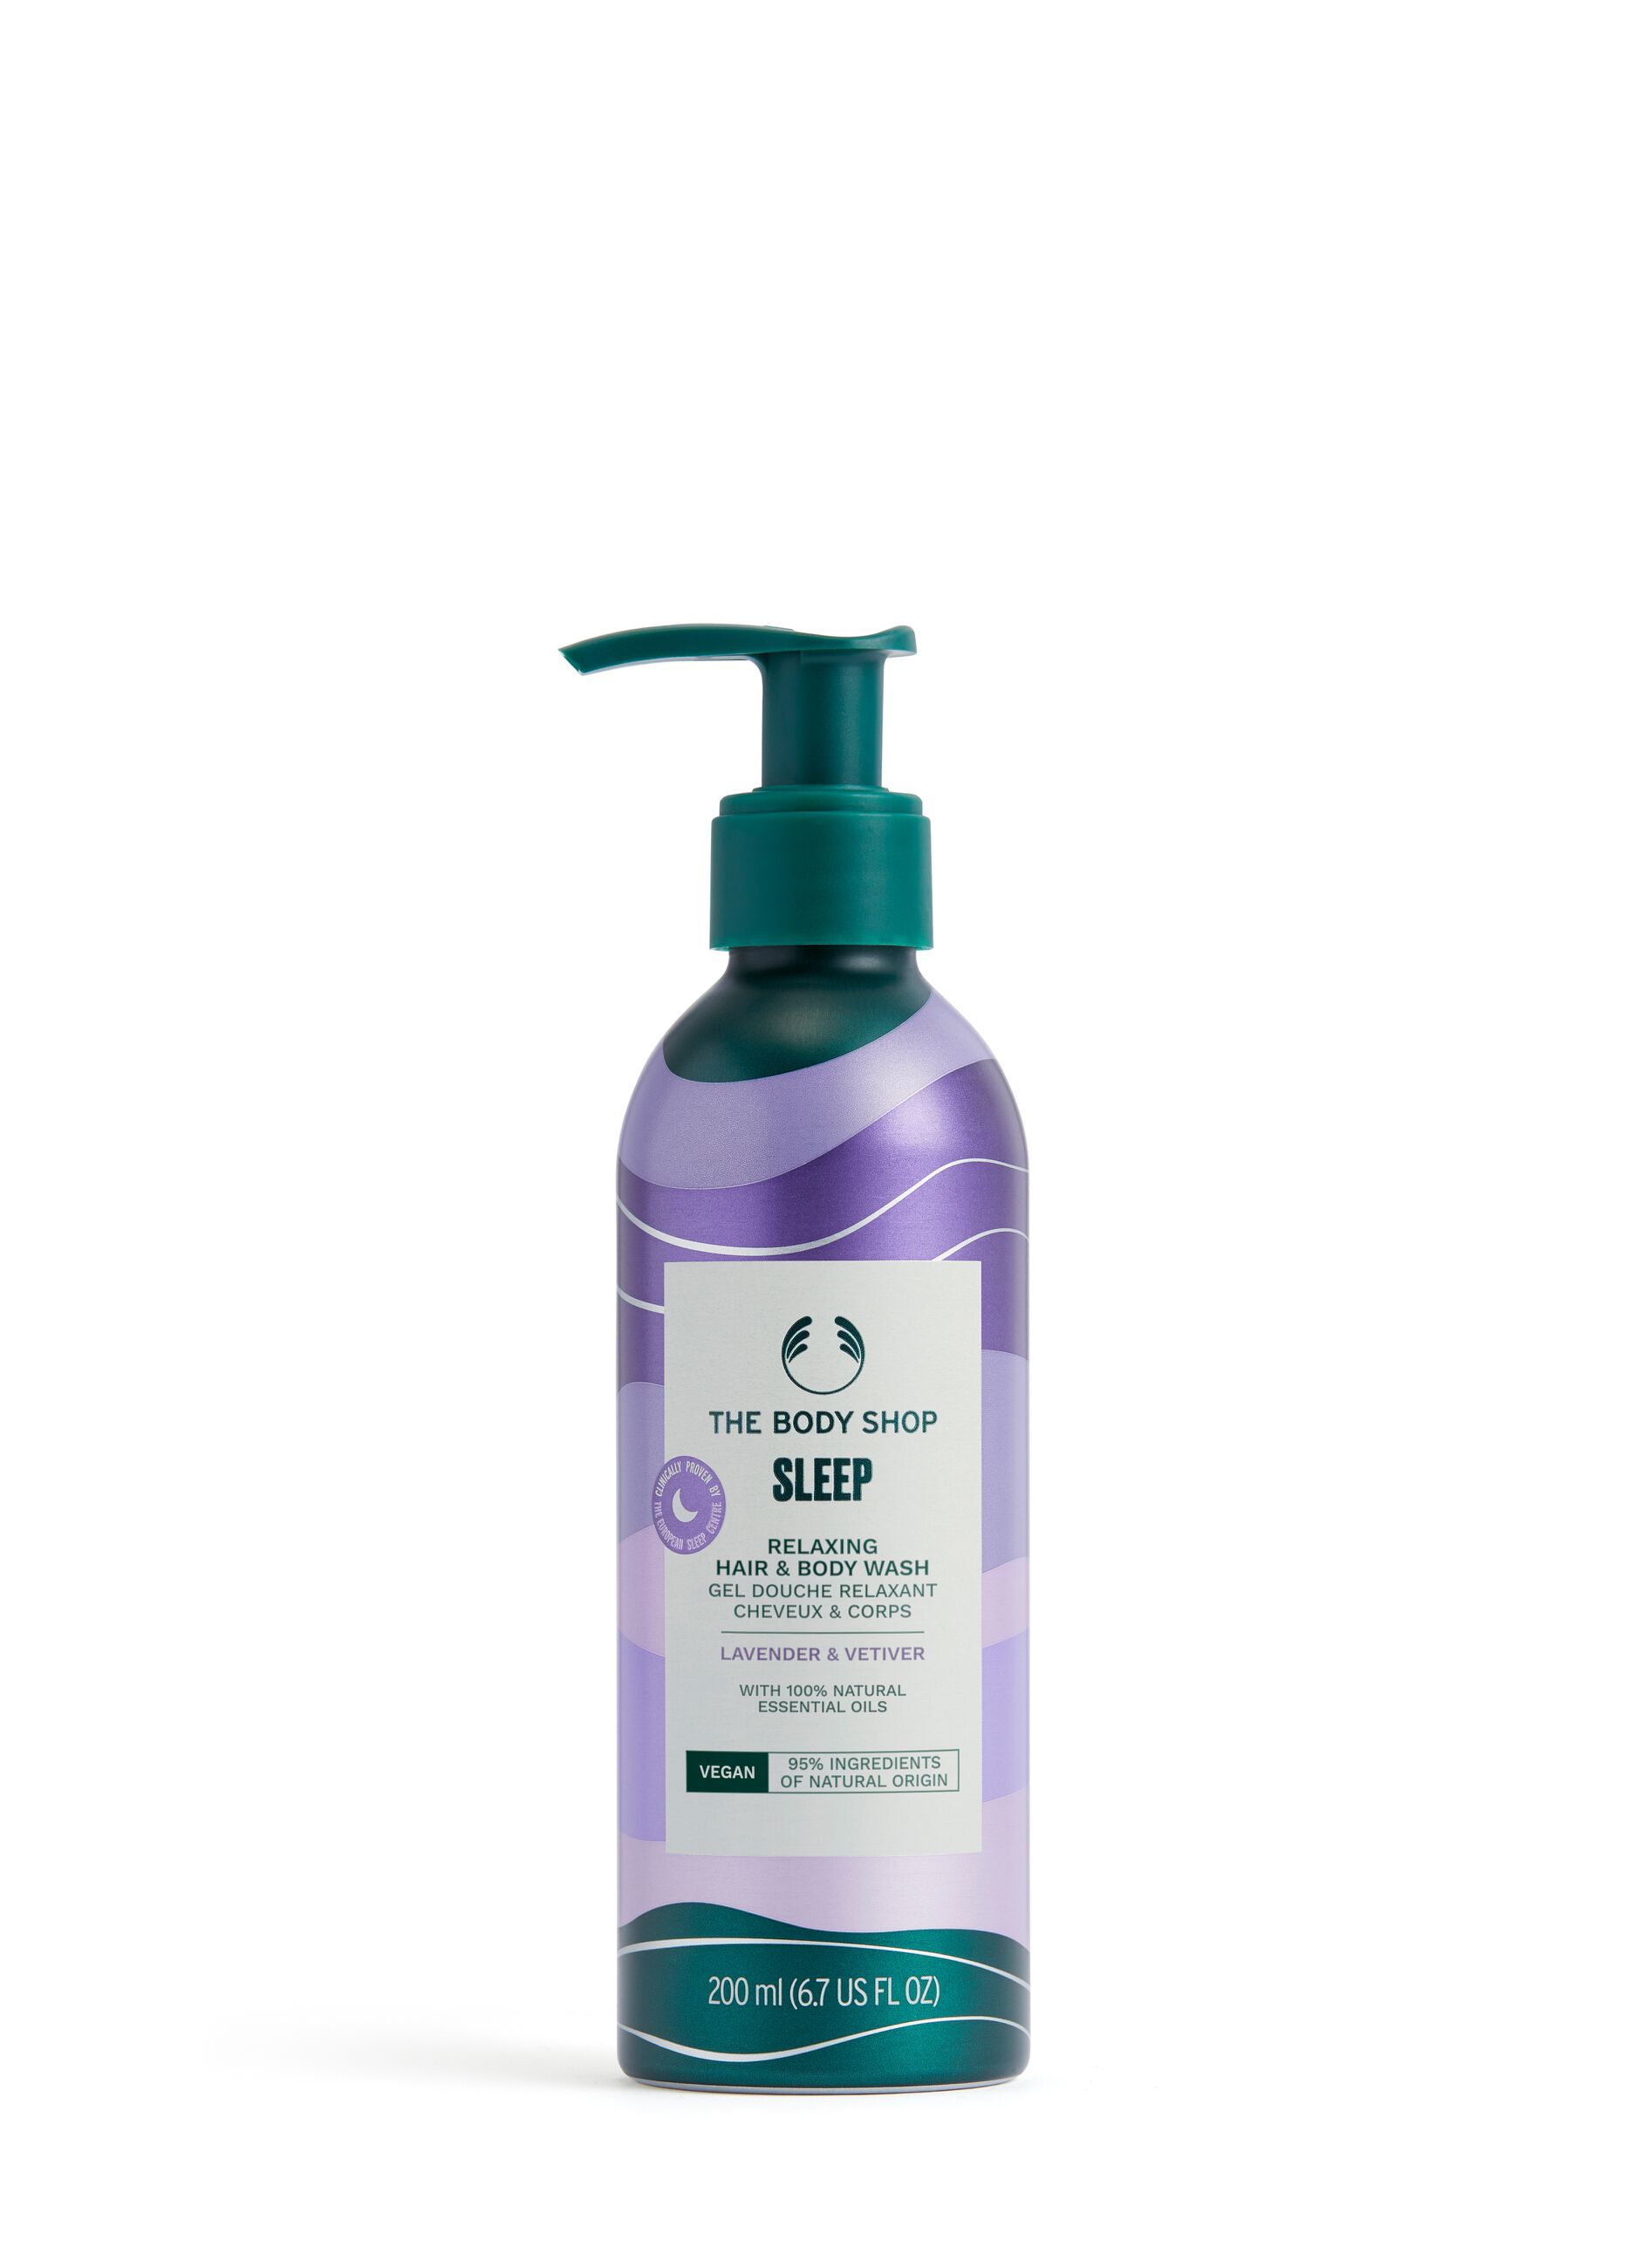 The Body Shop lavender and vetiver body and hair cleanser 200ml